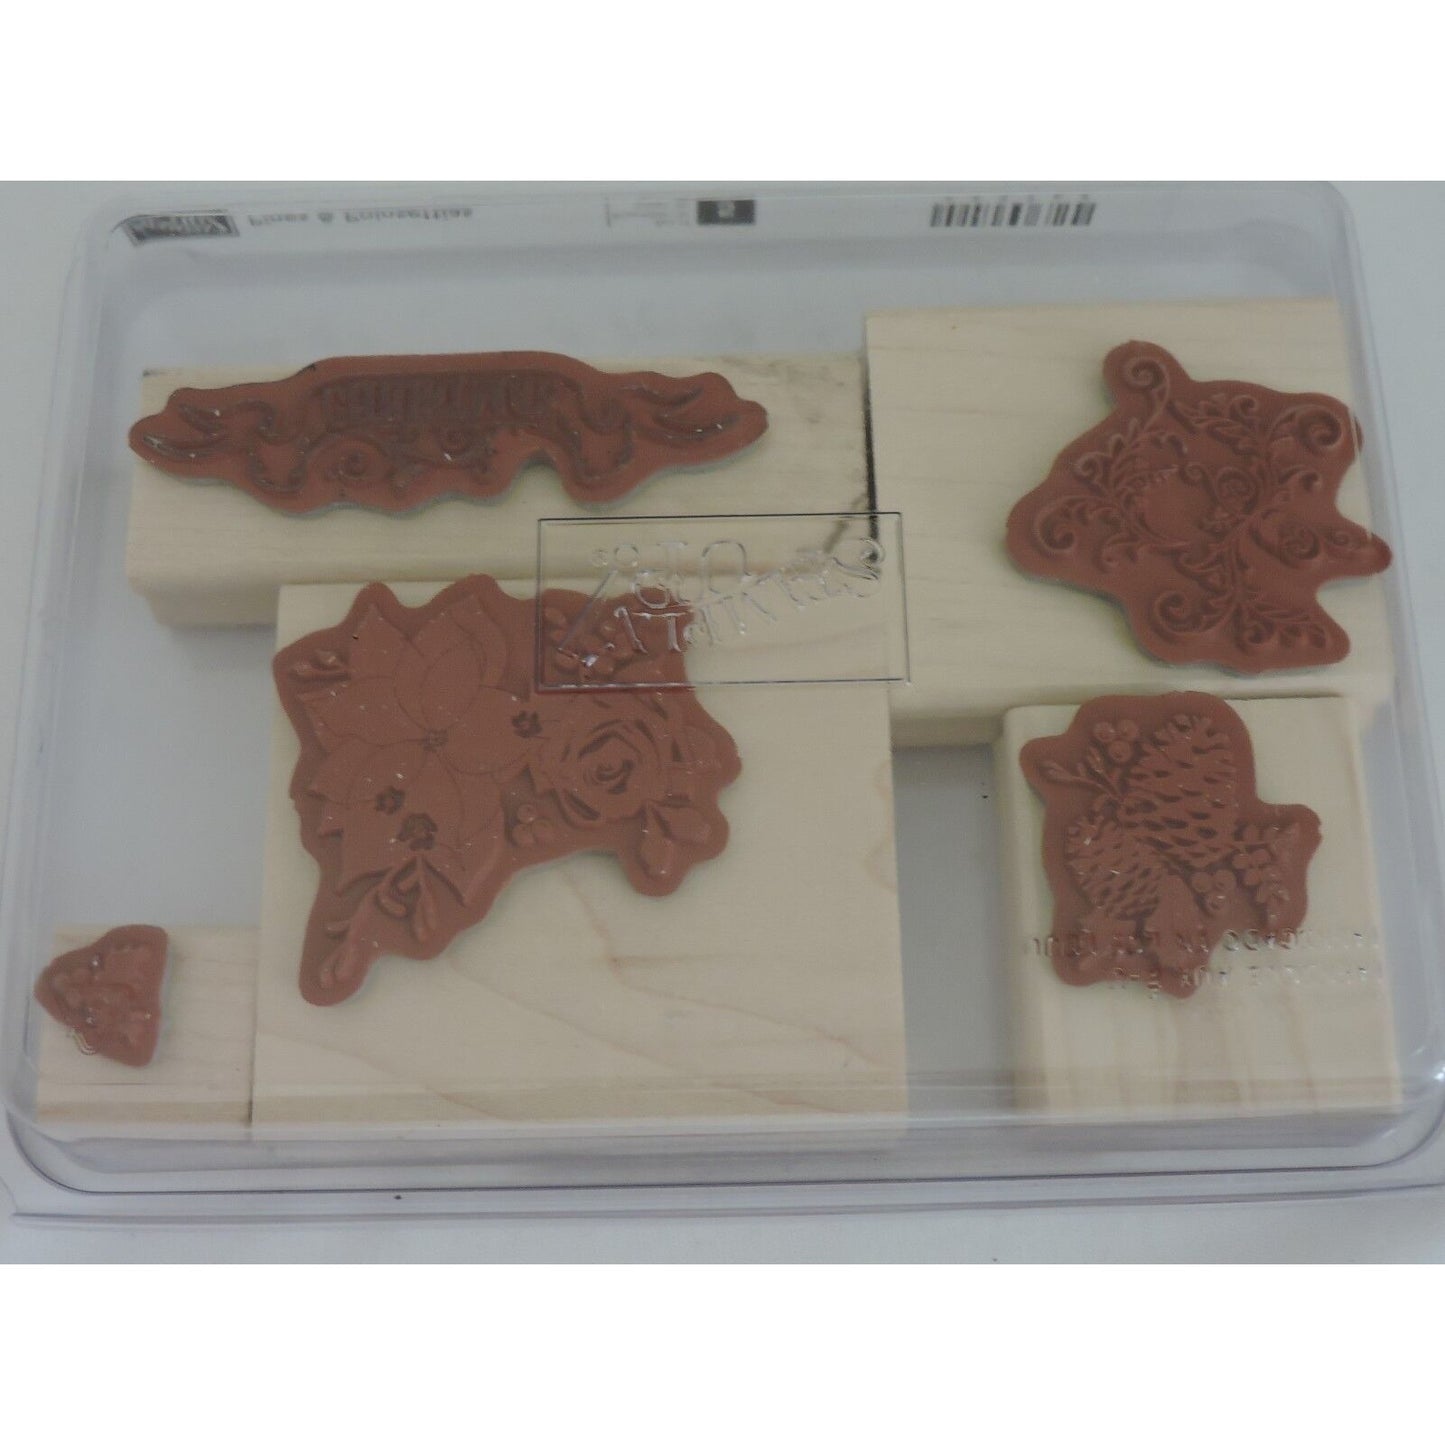 Stampin Up Rubber Stamps Set Pines and Poinsettias Christmas Holidays Pinecones